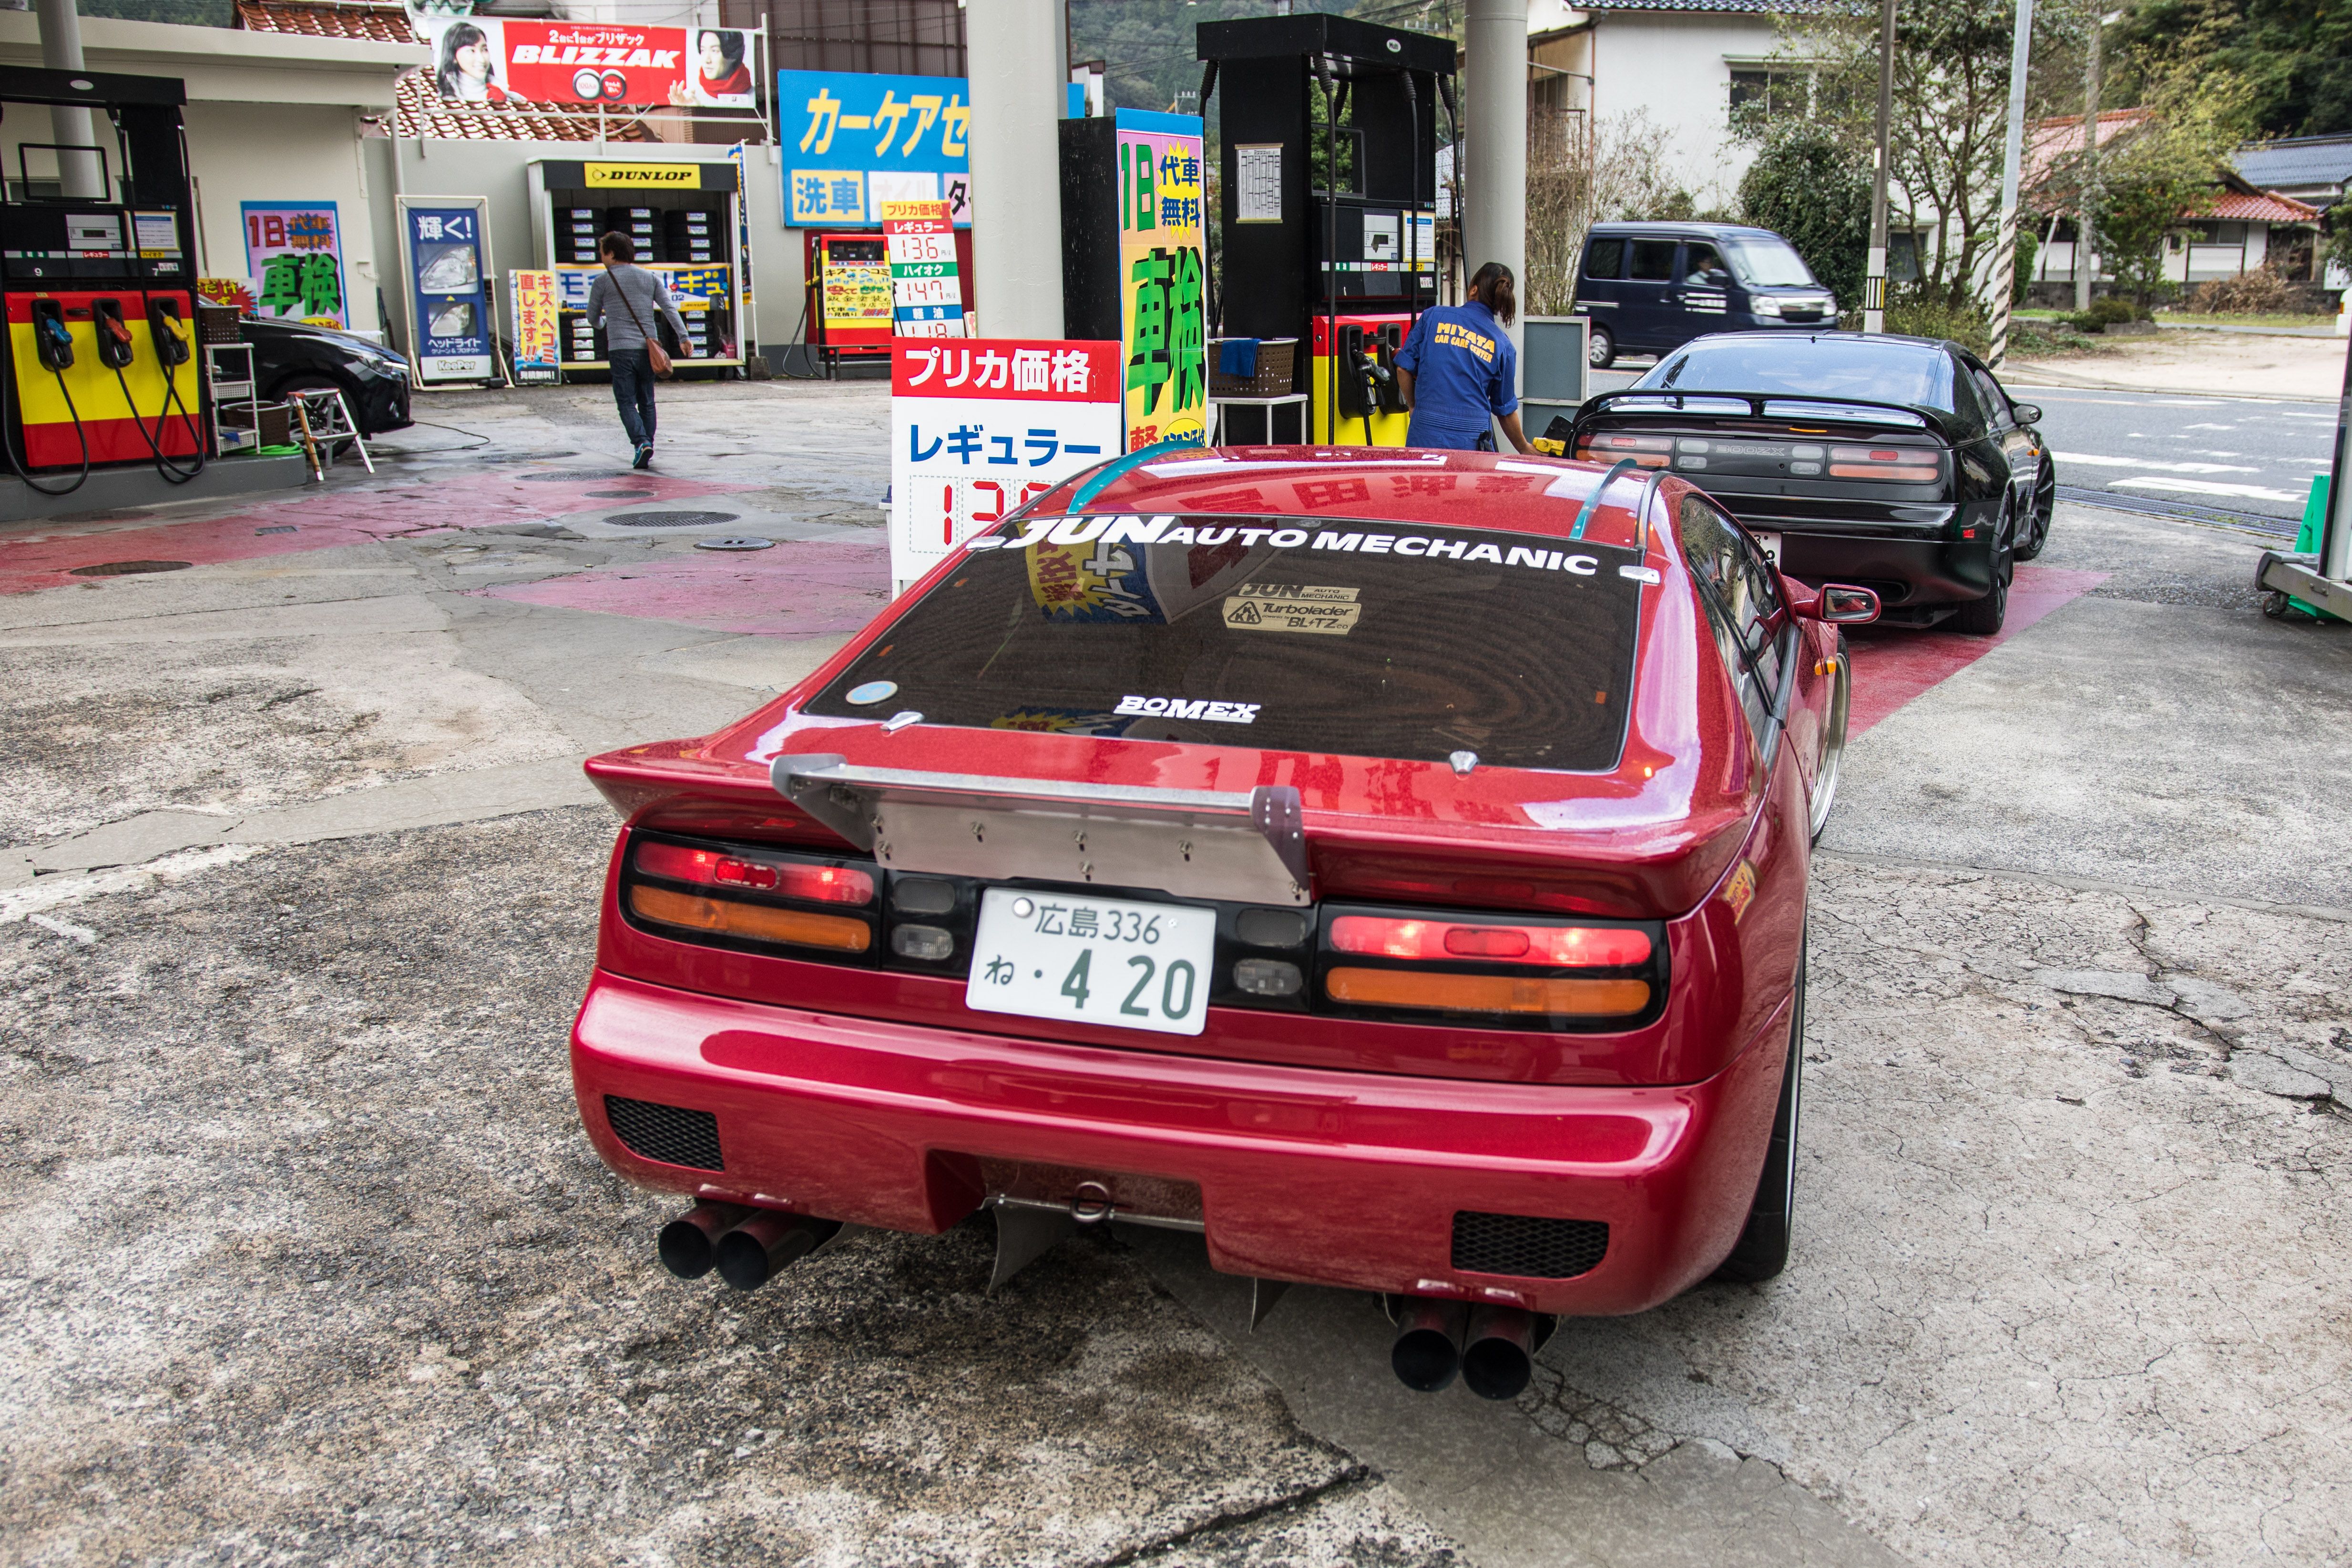 The Legend of the World's Fastest Nissan 300ZX